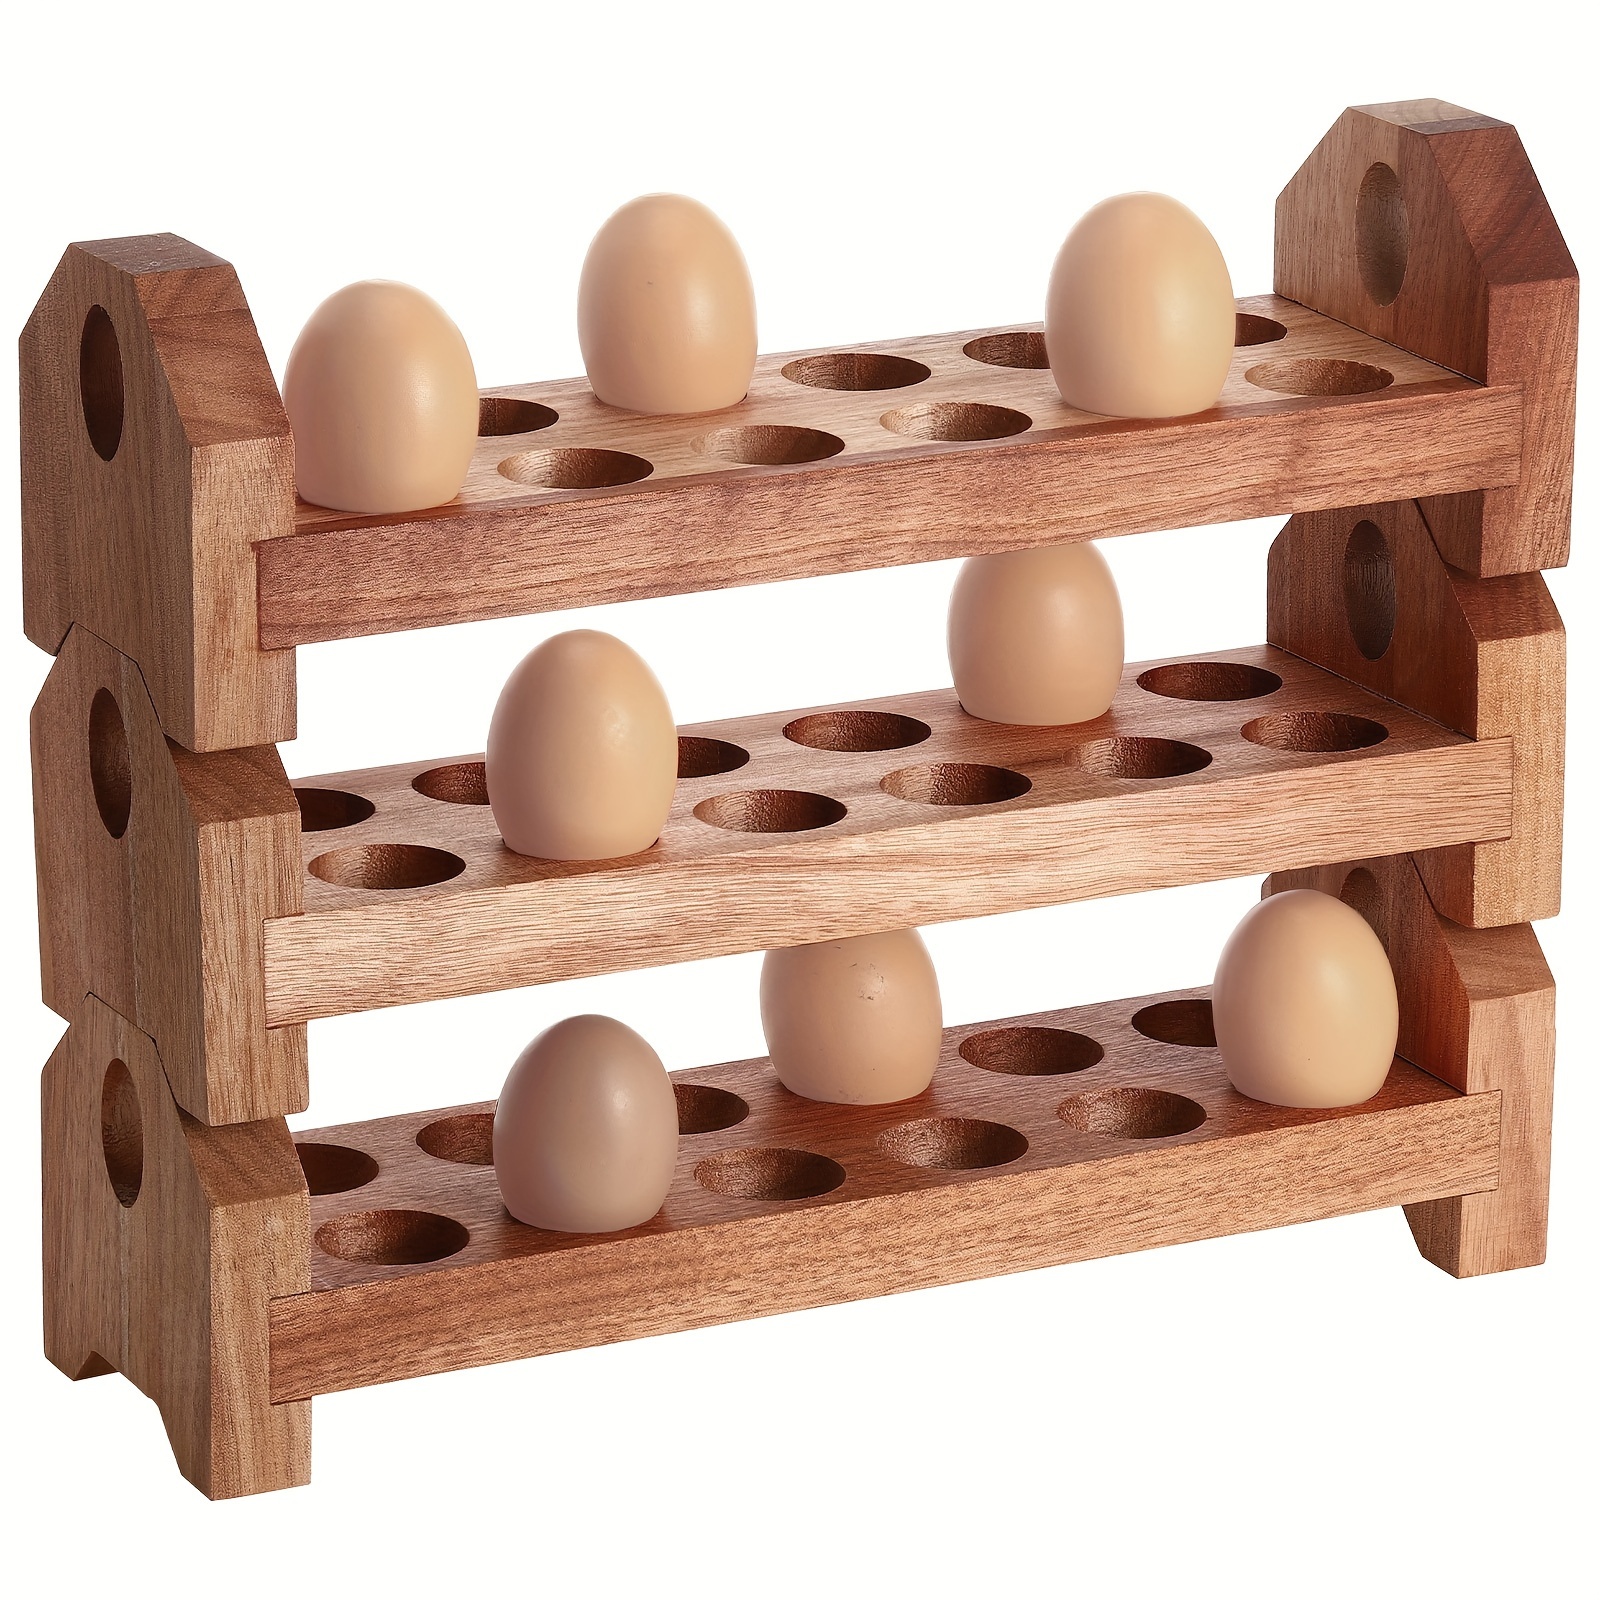 

Wooden Egg Holder Countertop Egg Storage Trays Stackable For 36 Fresh Eggs Tray Organizer Egg Container Rack For Rustic Kitchen Decoration (three Layers, 14 X 4 X 4 Inch)